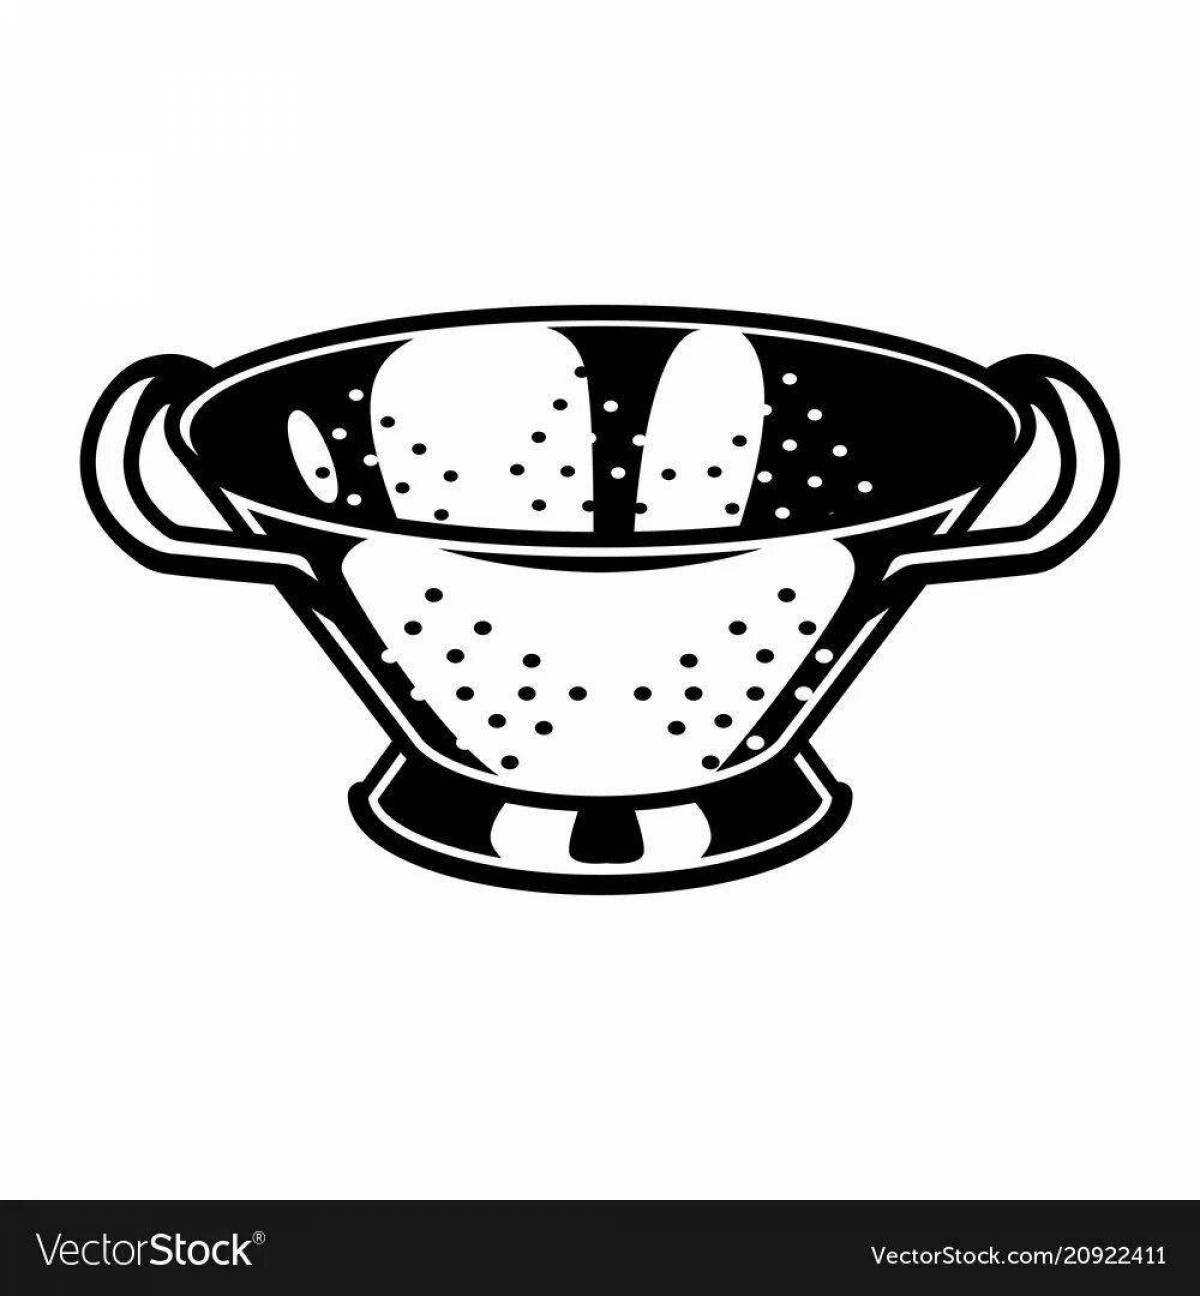 Charming sieve coloring